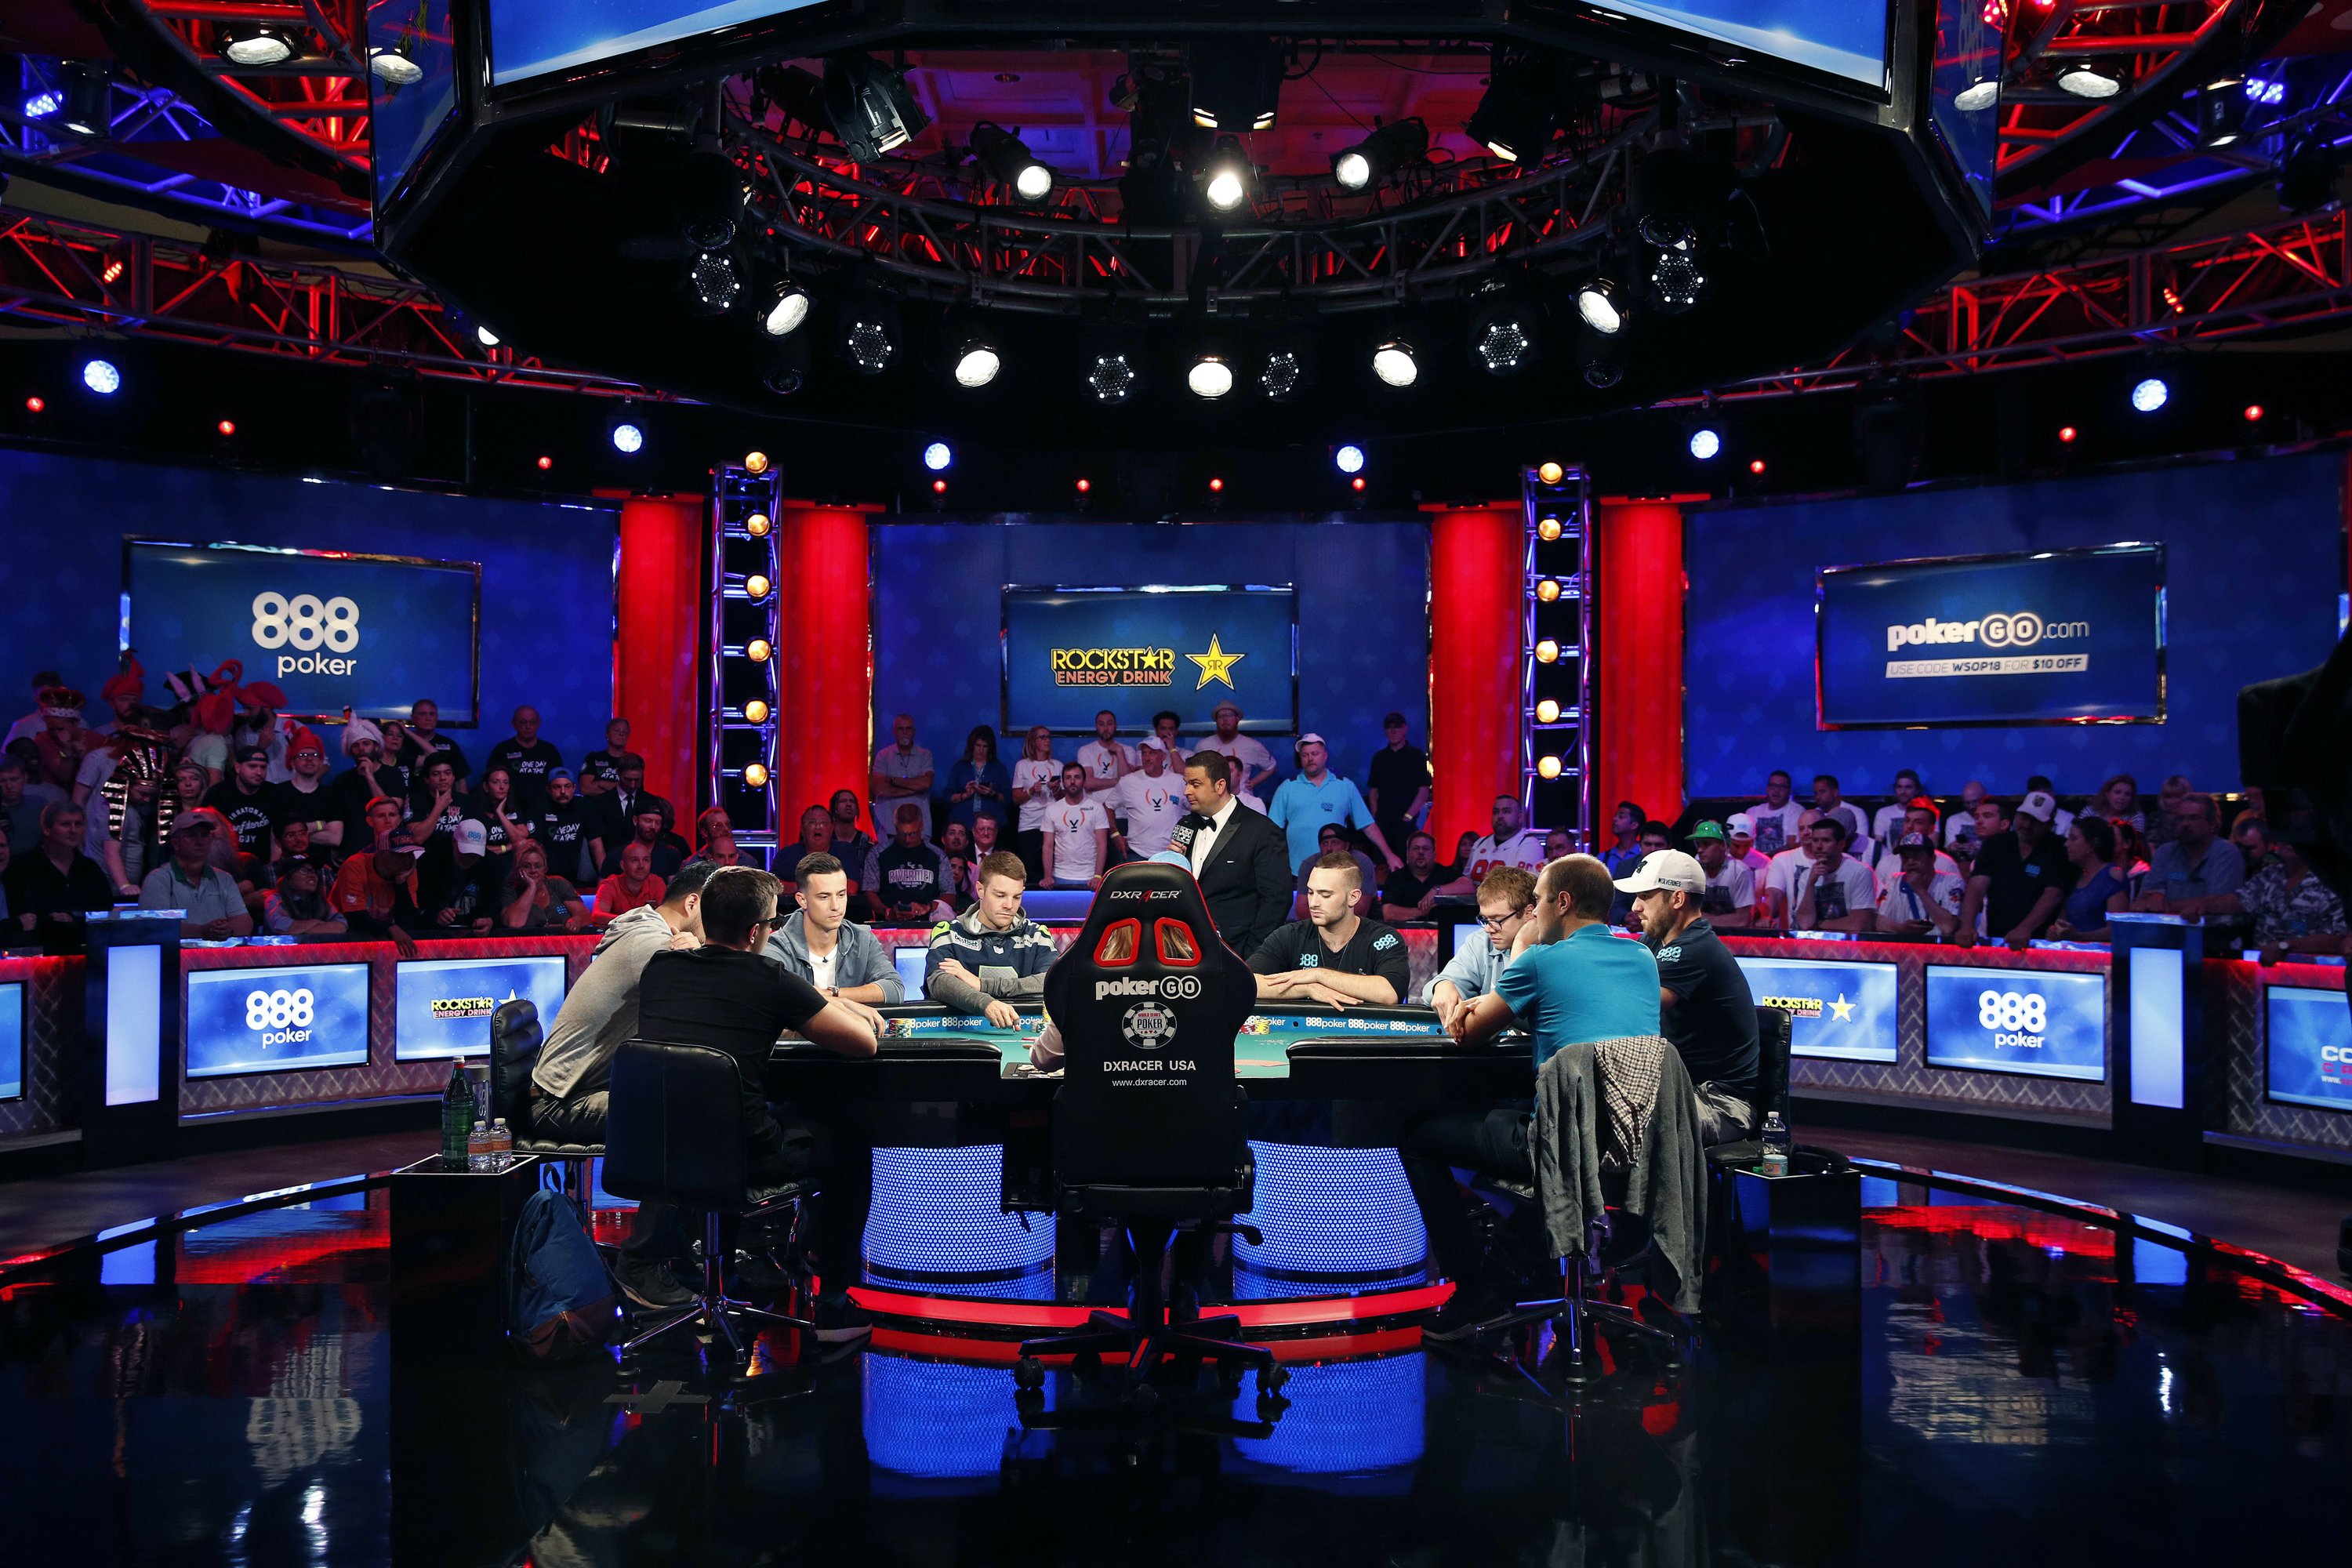 50th annual World Series of Poker opens in Las Vegas